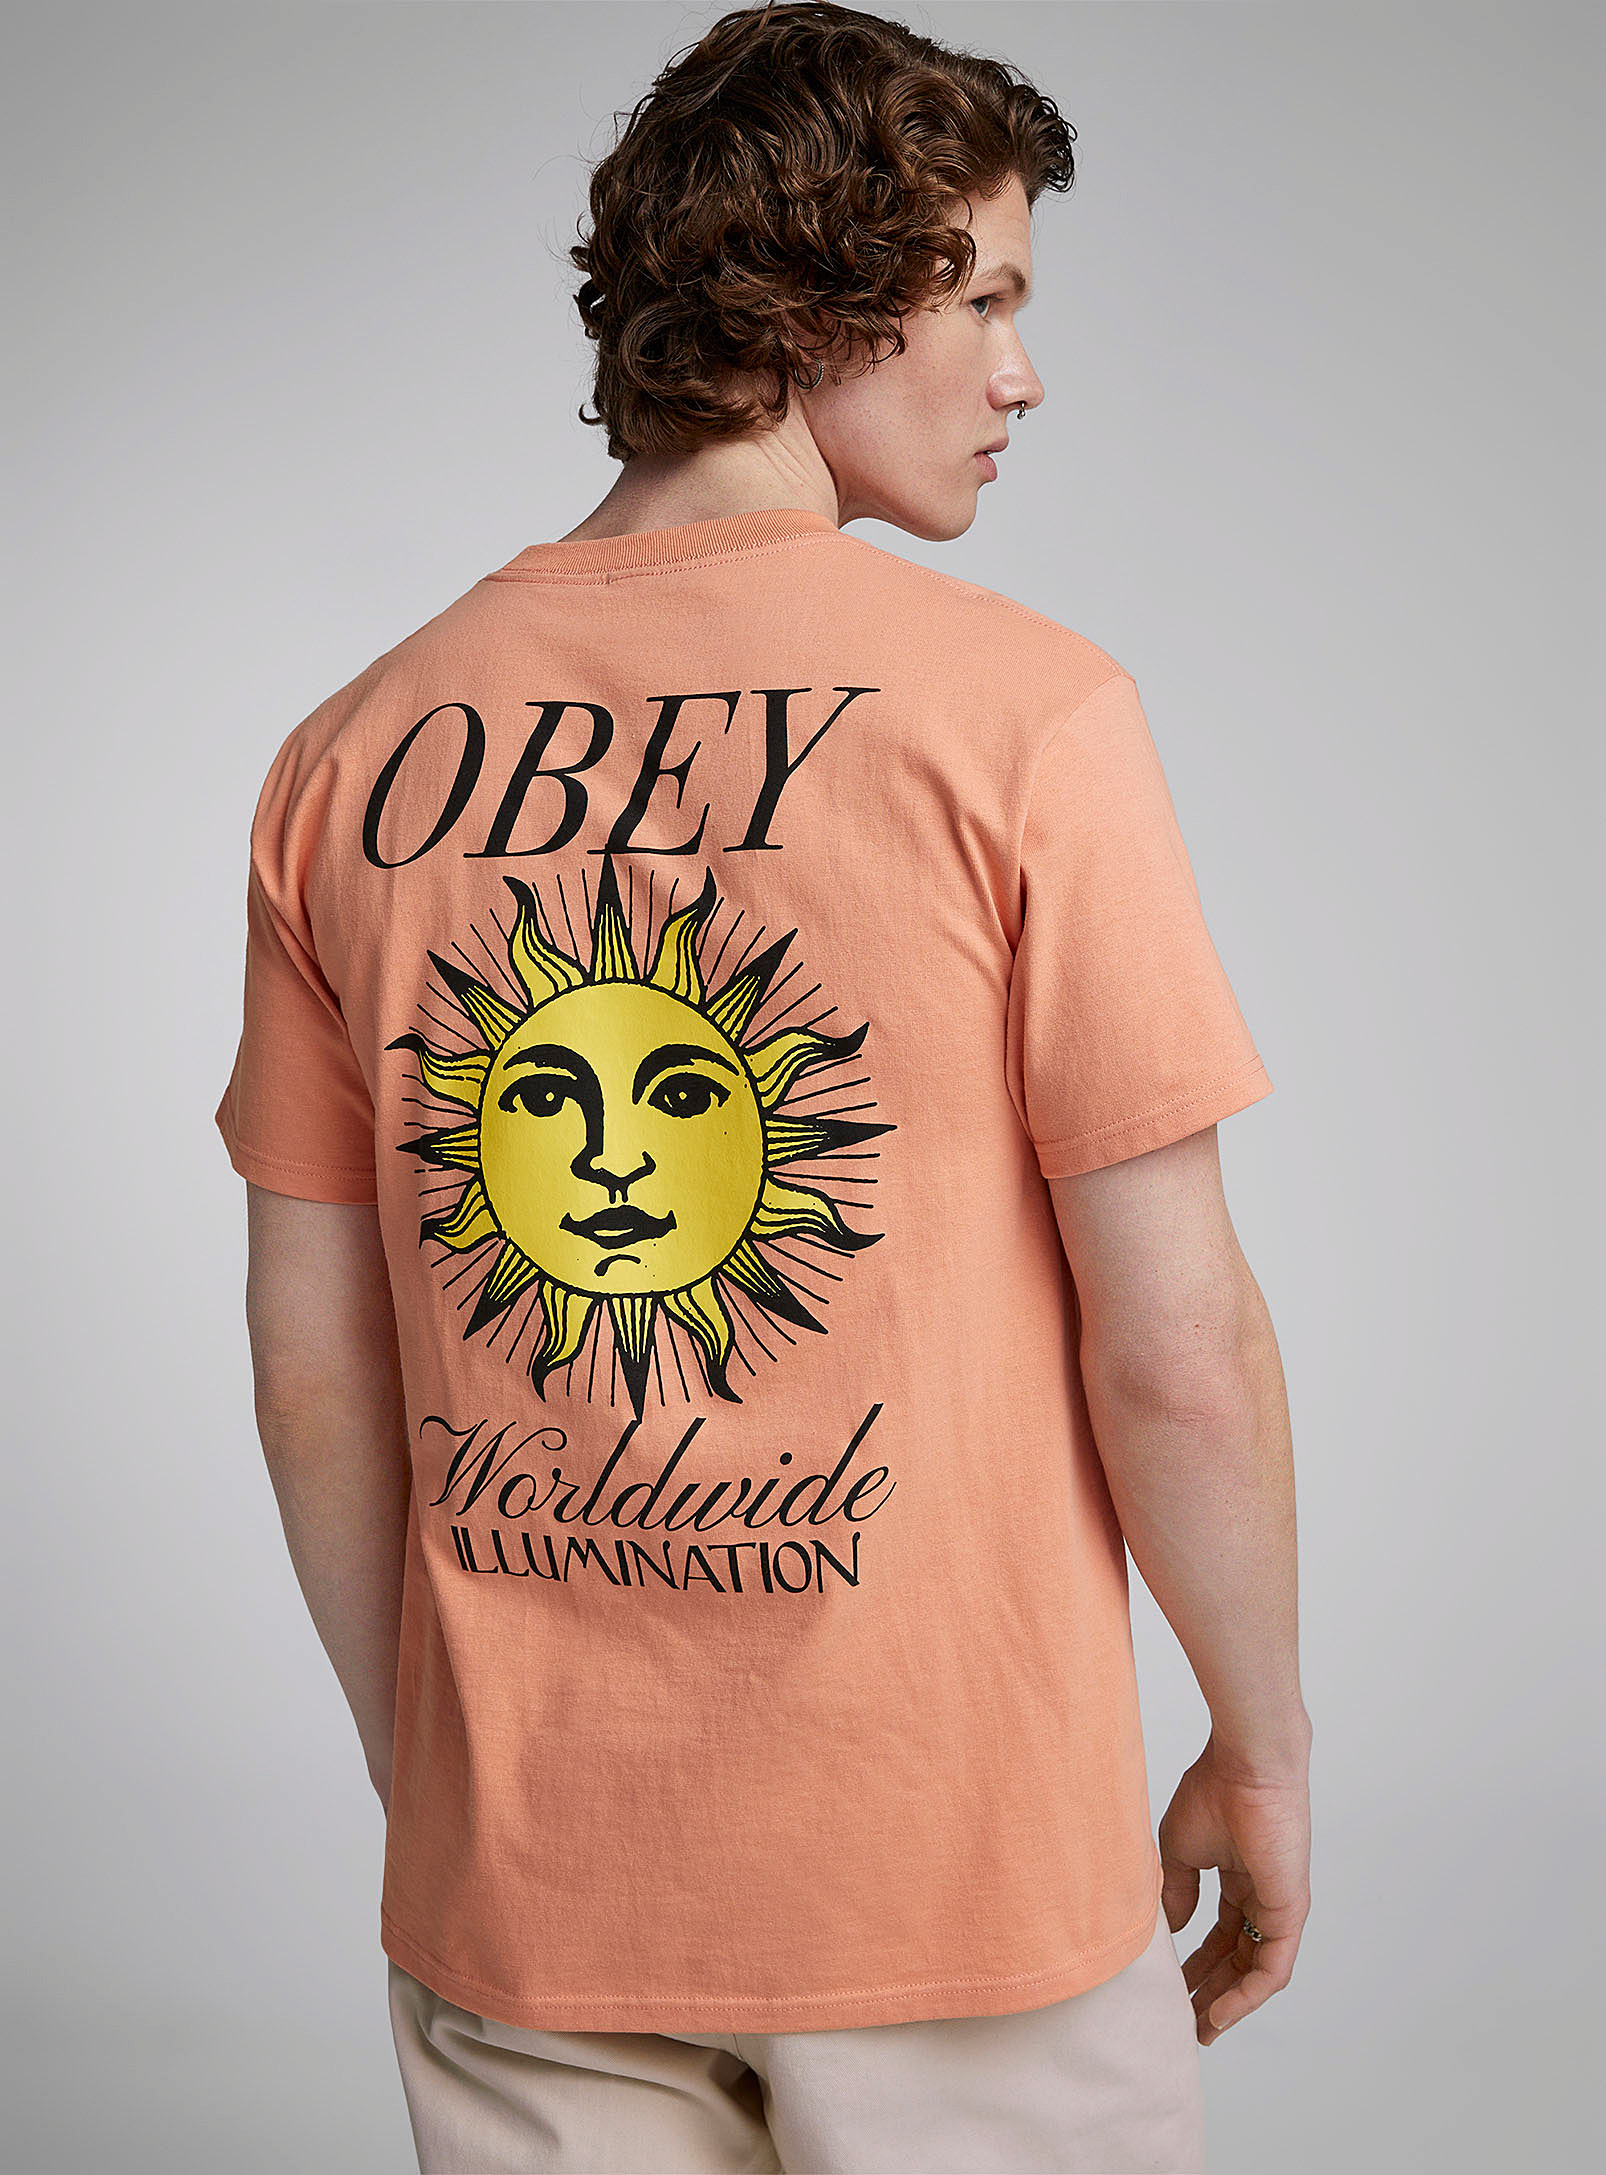 Obey Illumination T-shirt In Coral